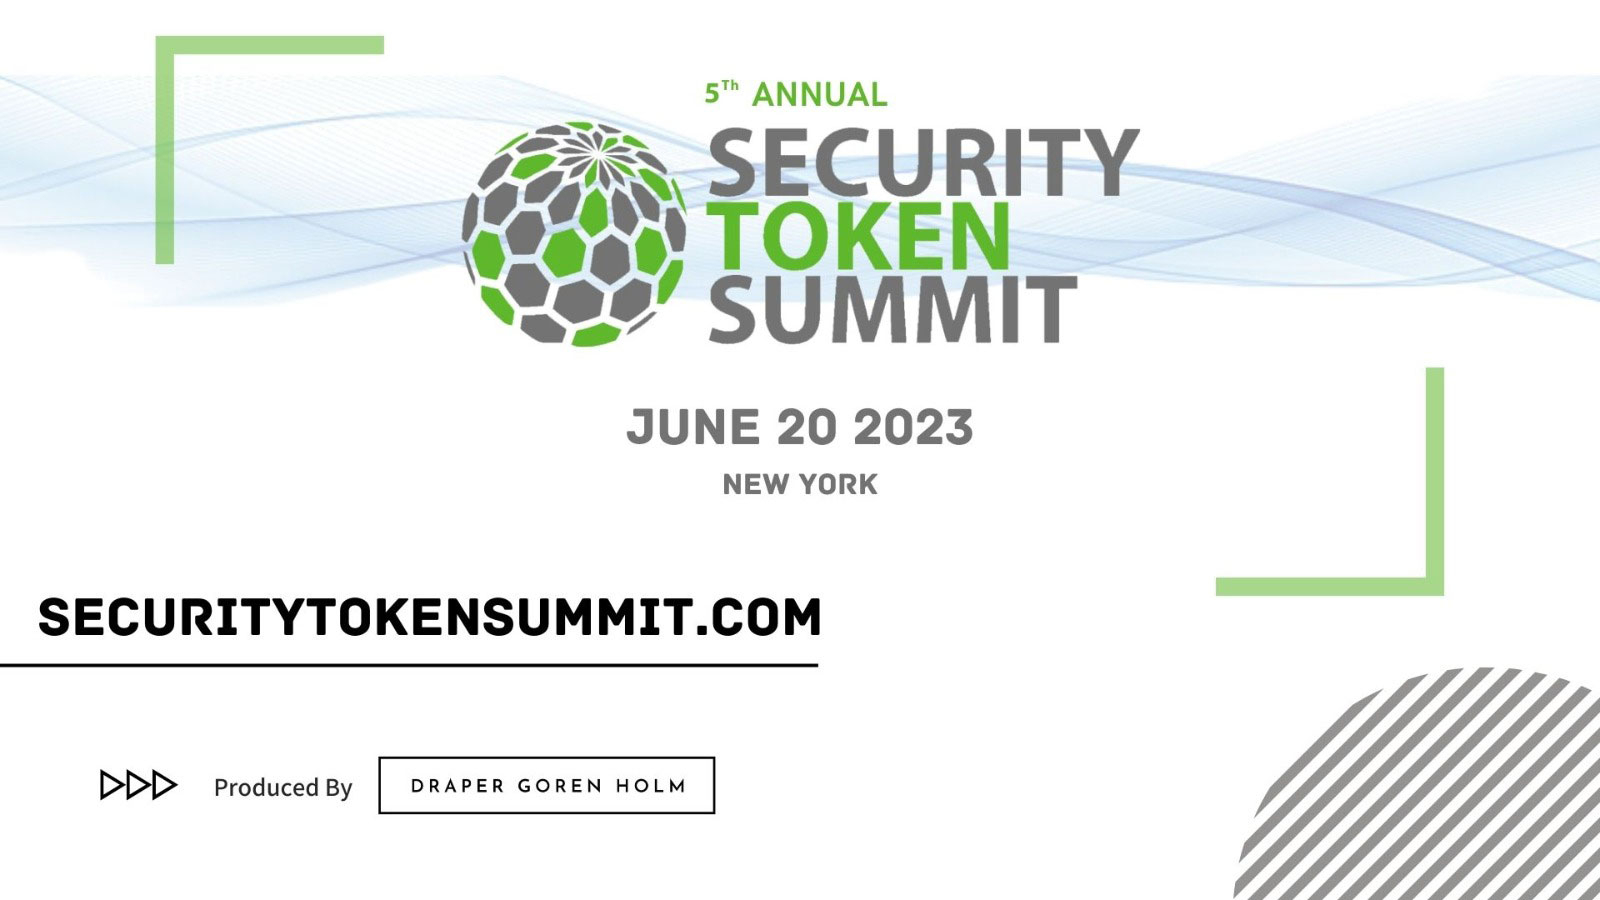 Draper Goren Holm to Host 5th Annual Security Token Summit in New York City this June